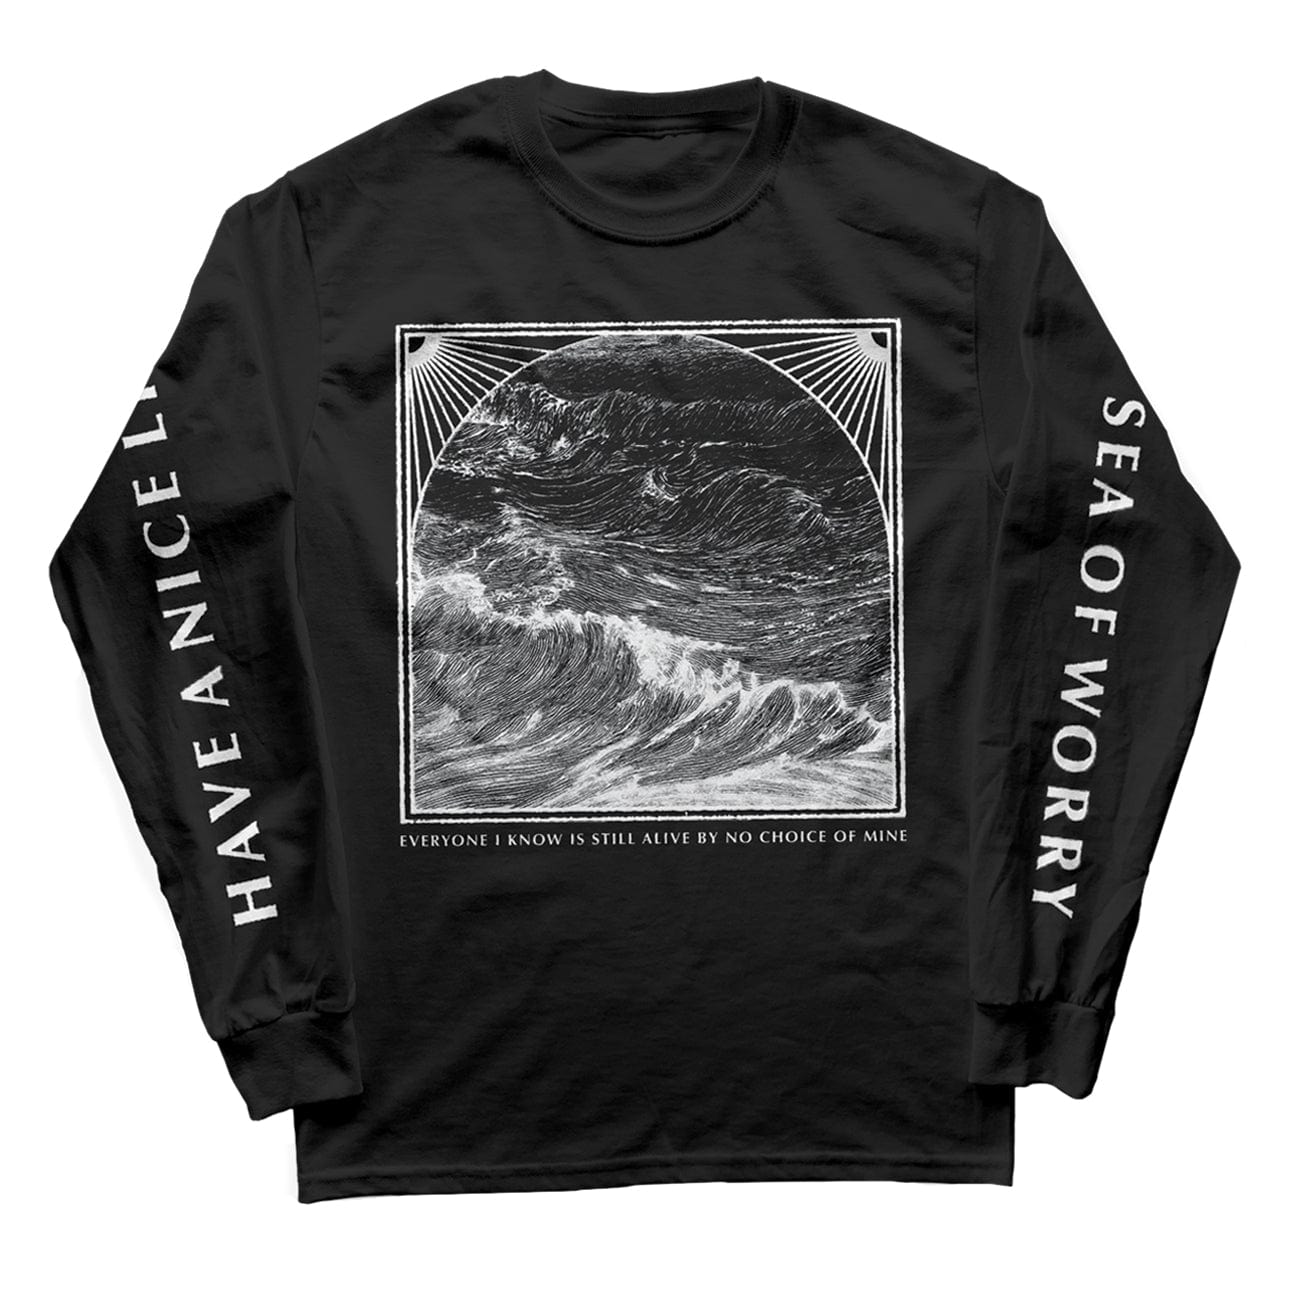 The Flenser Apparel Have a Nice Life "Sea of Worry" Longsleeve Shirt